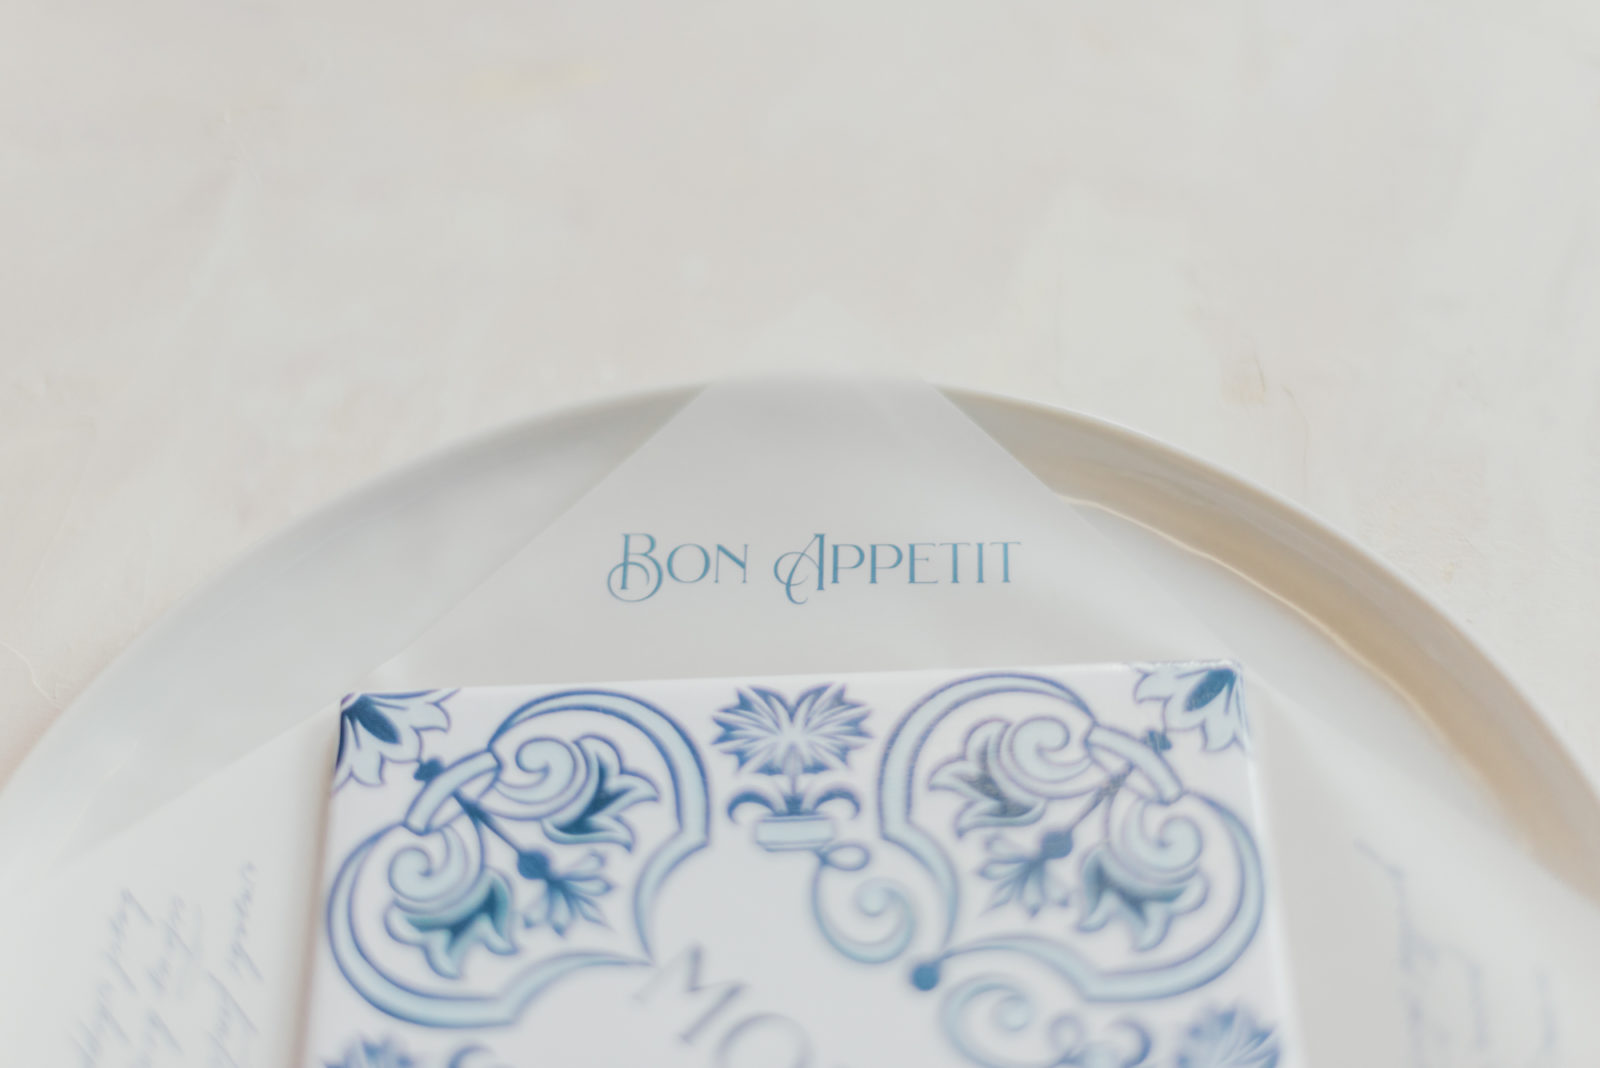 Table settings for a Portugal inspired wedding, azure, tiles